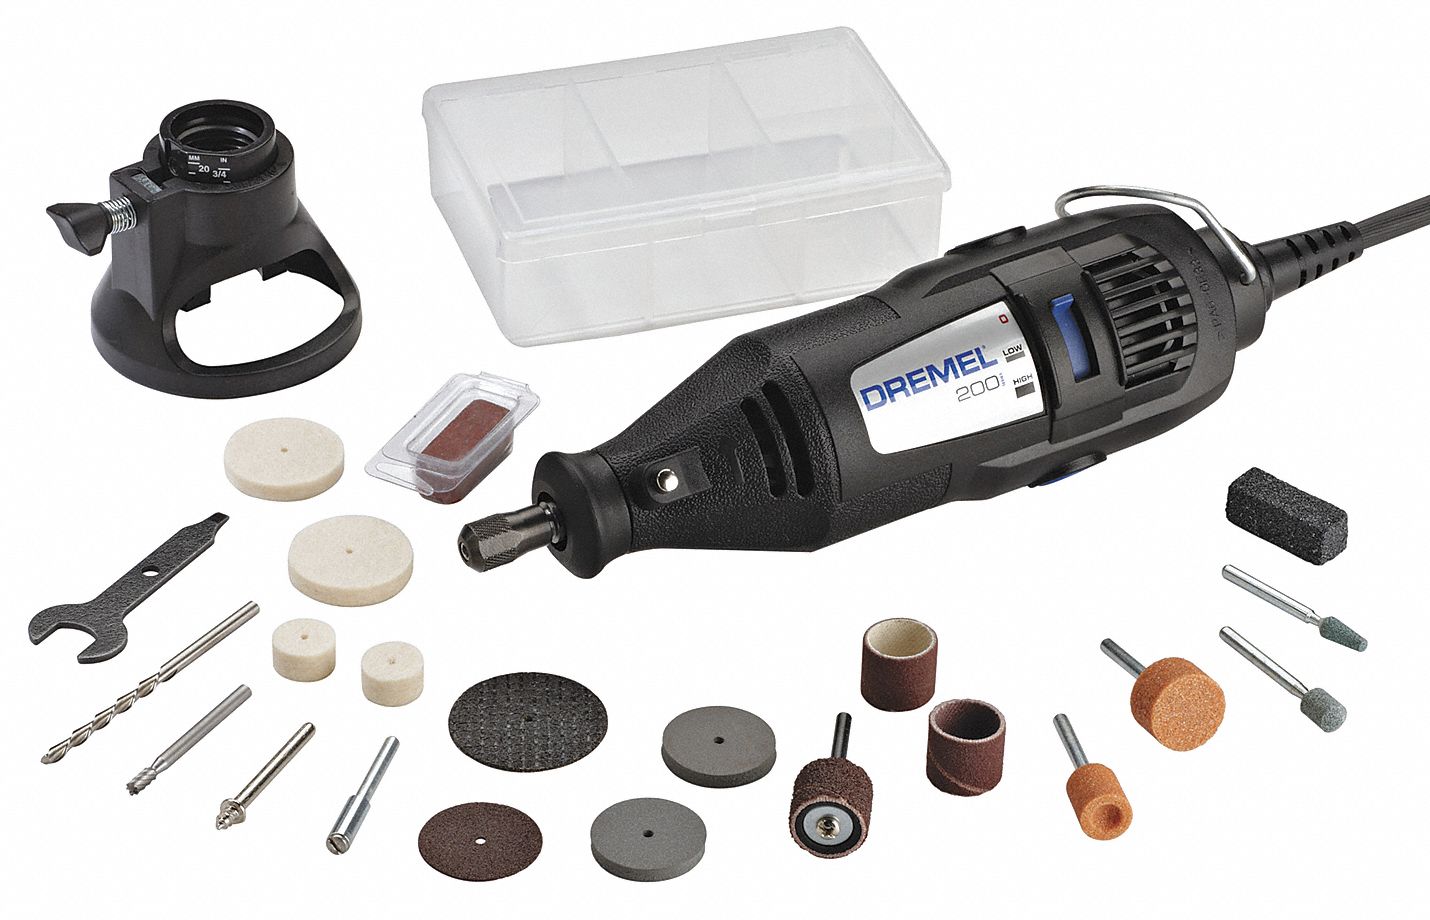 Rotary Tool Kit: 0.9 A Current, 35,000 RPM Max. Speed, Dual Speed, 1/8 in Collet Size